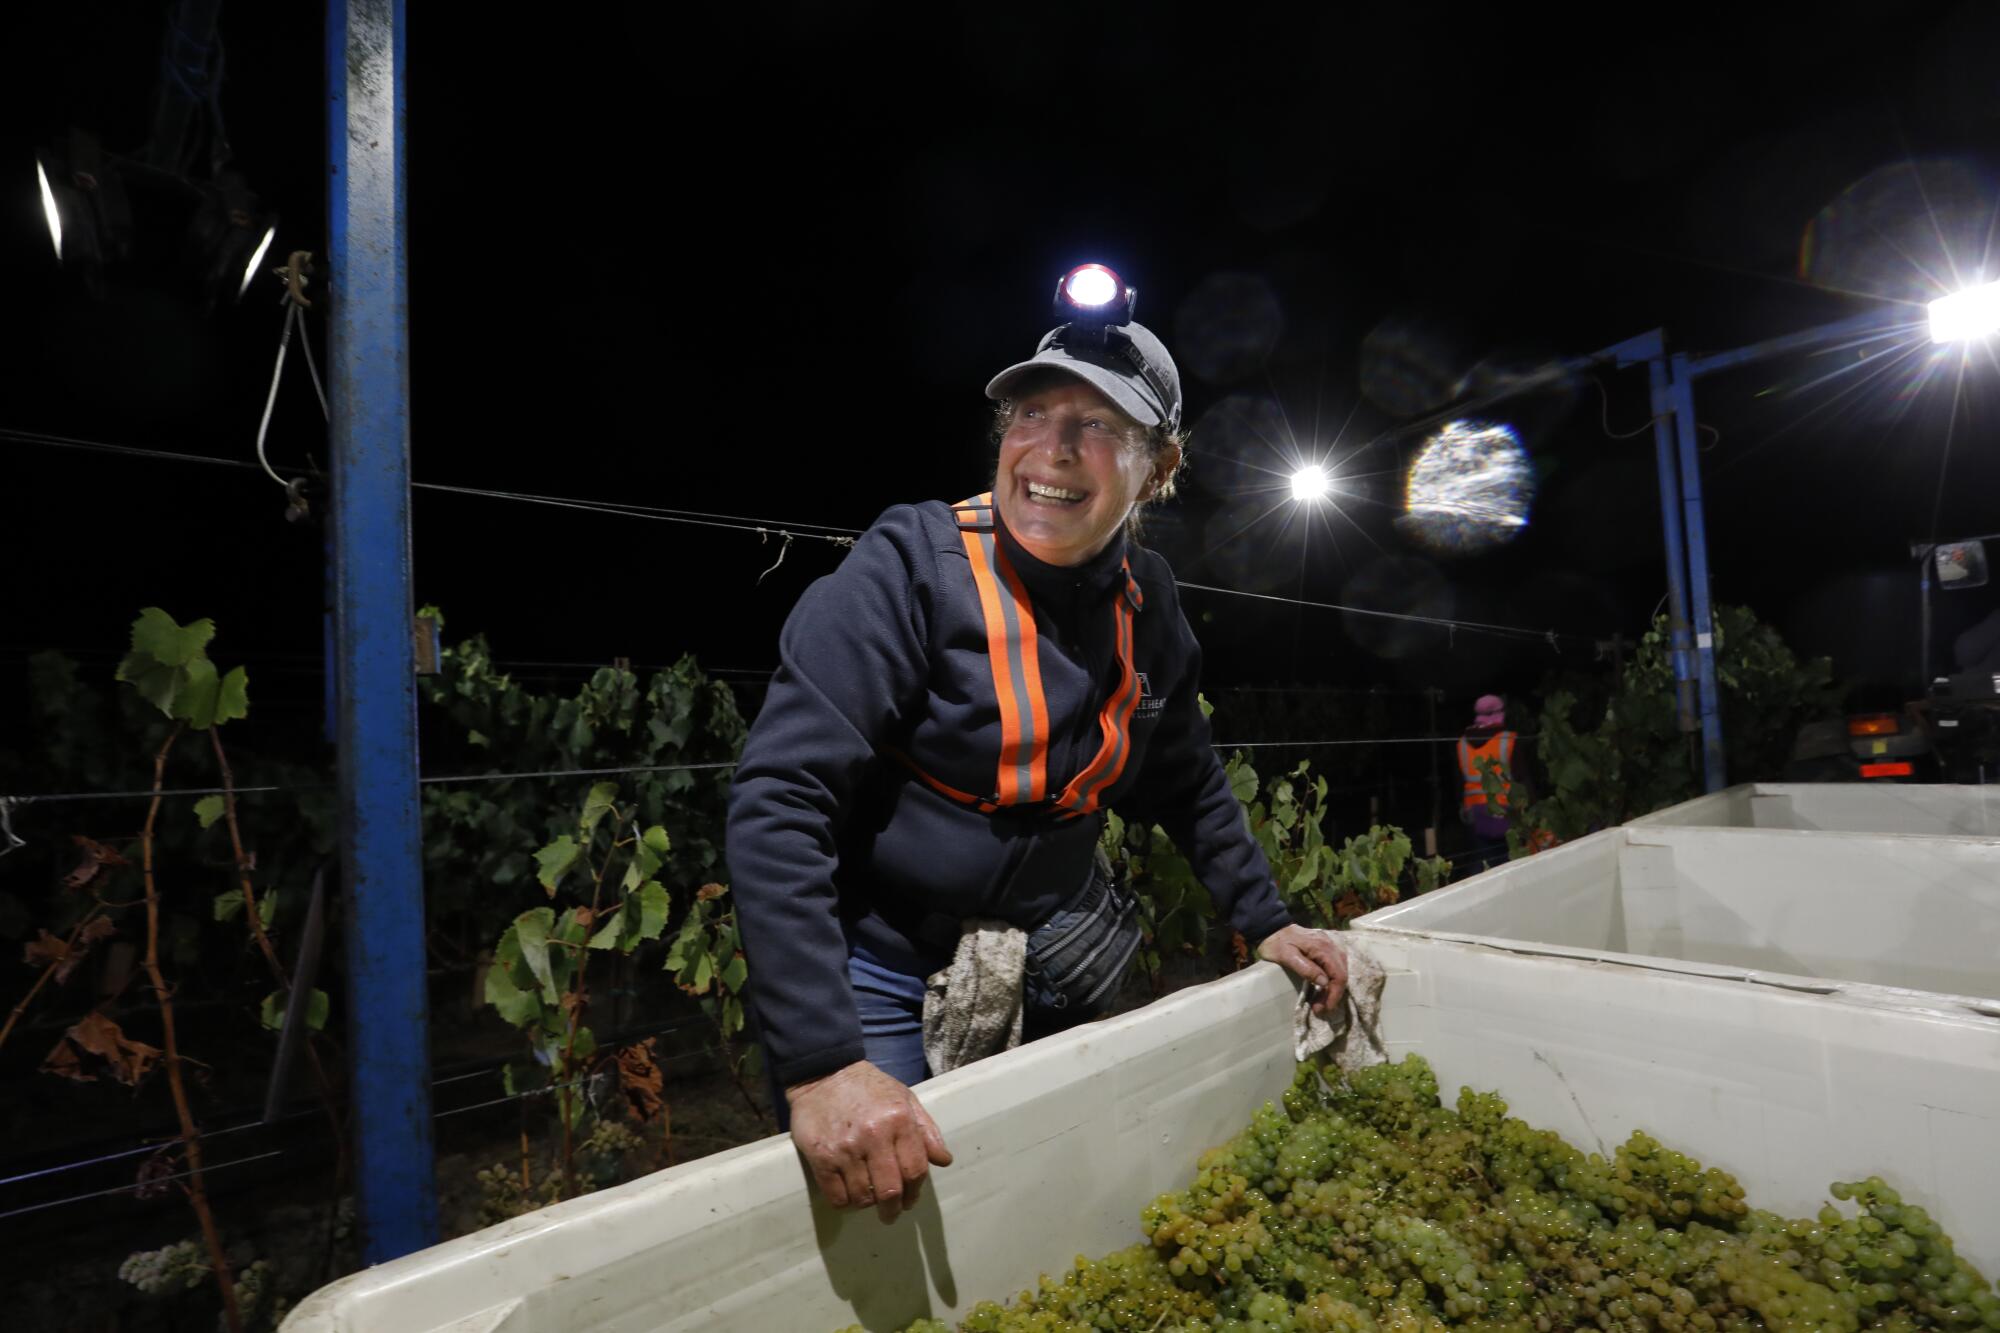 Kathy Joseph harvests Chardonnay grapes along with the crew in Lompoc.